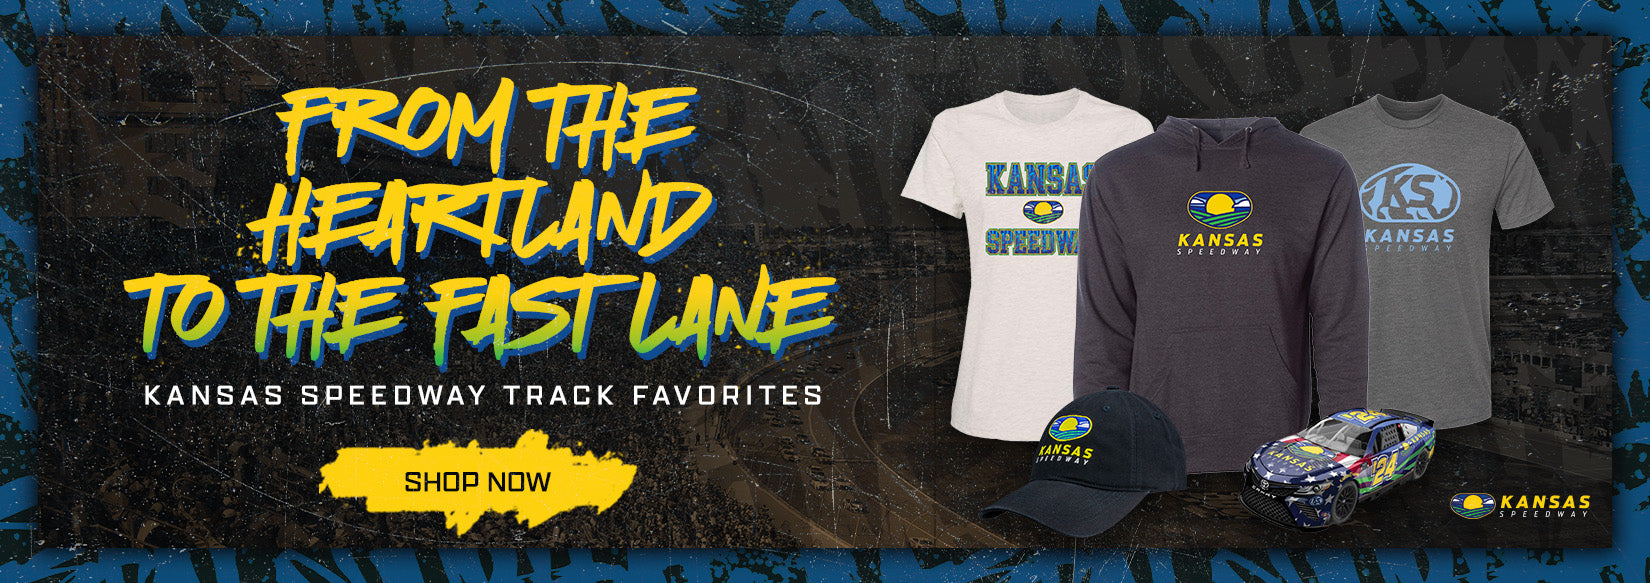 From the Heartland to the Fast Lane - Kansas Speedway Track Favorites - SHOP NOW